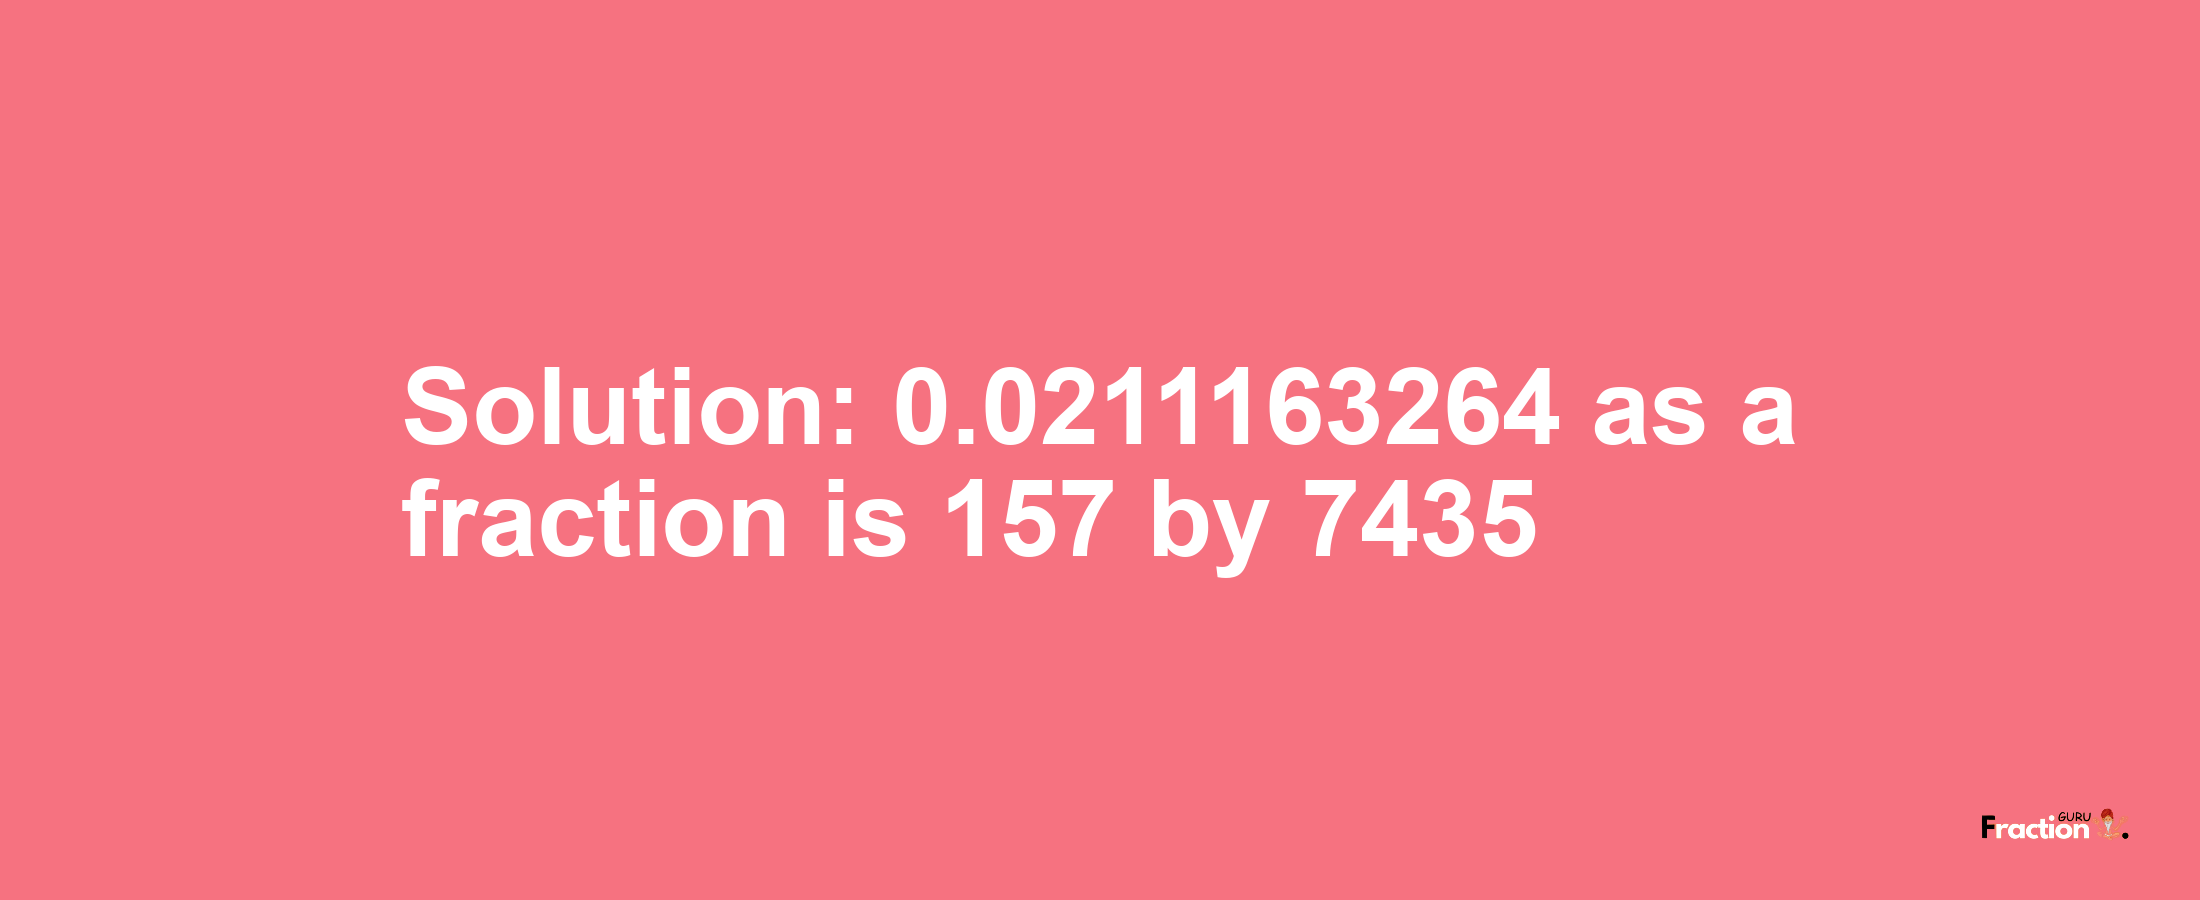 Solution:0.0211163264 as a fraction is 157/7435